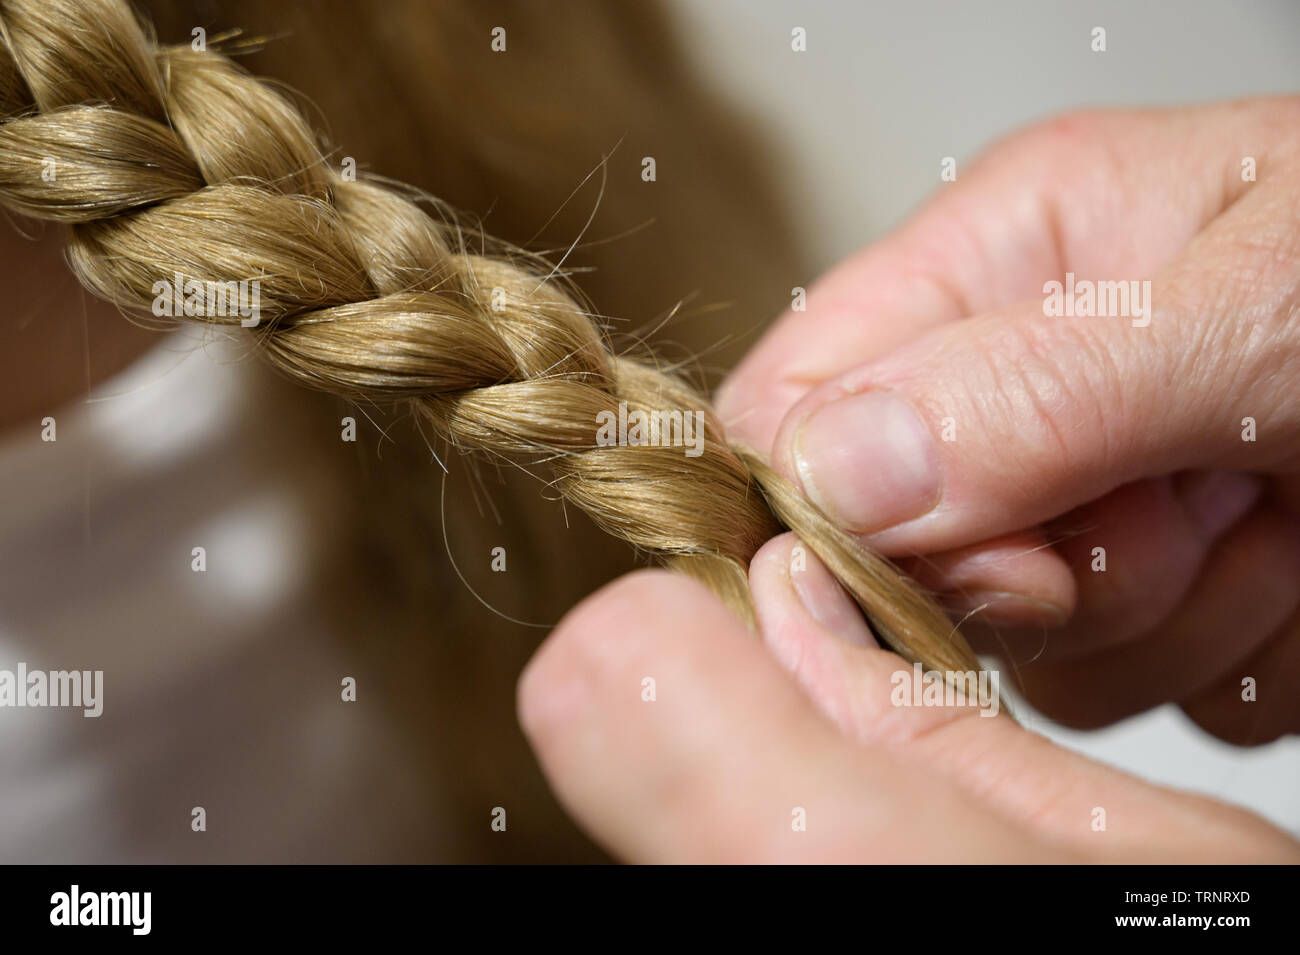 randmother make pigtail her granddaughter. Selective focus. Stock Photo